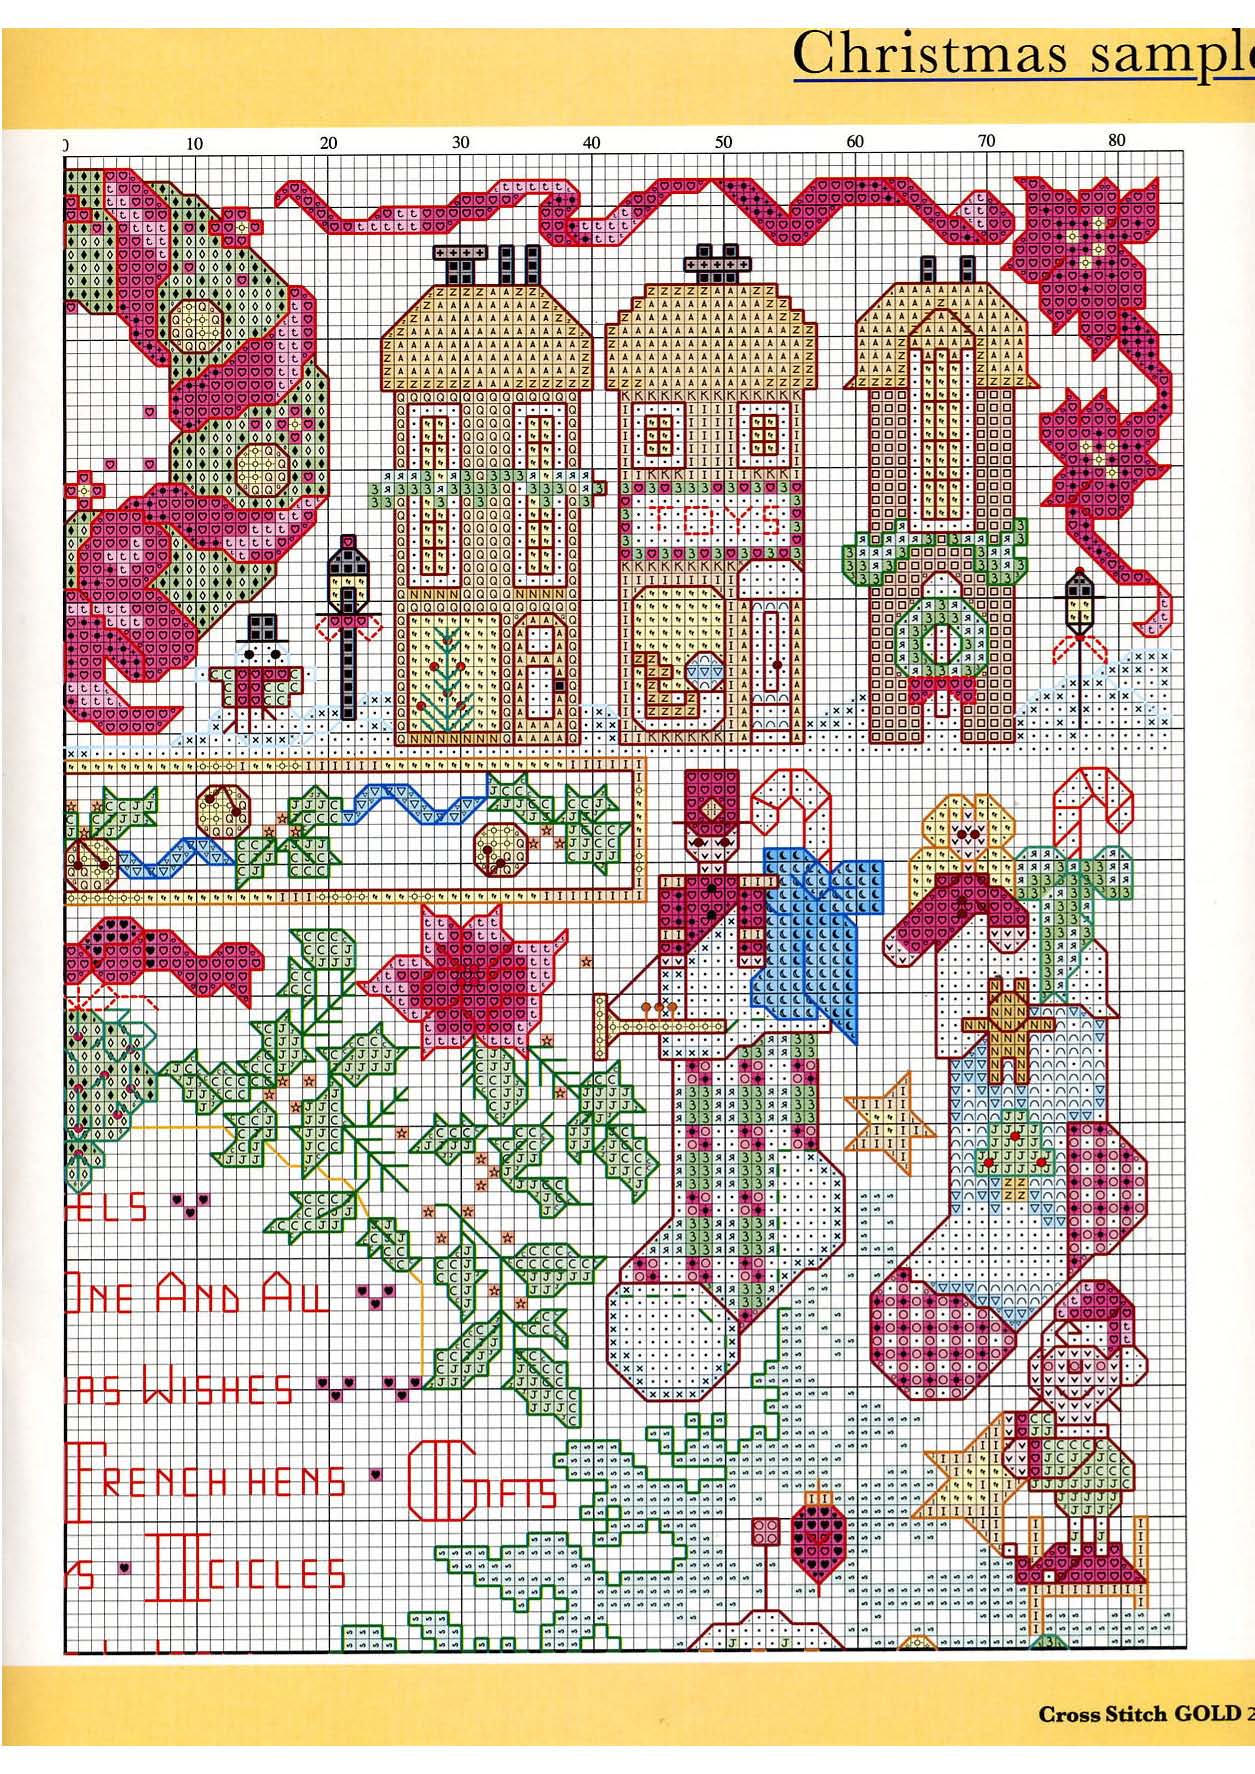 Christmas sampler with lots of details (3)